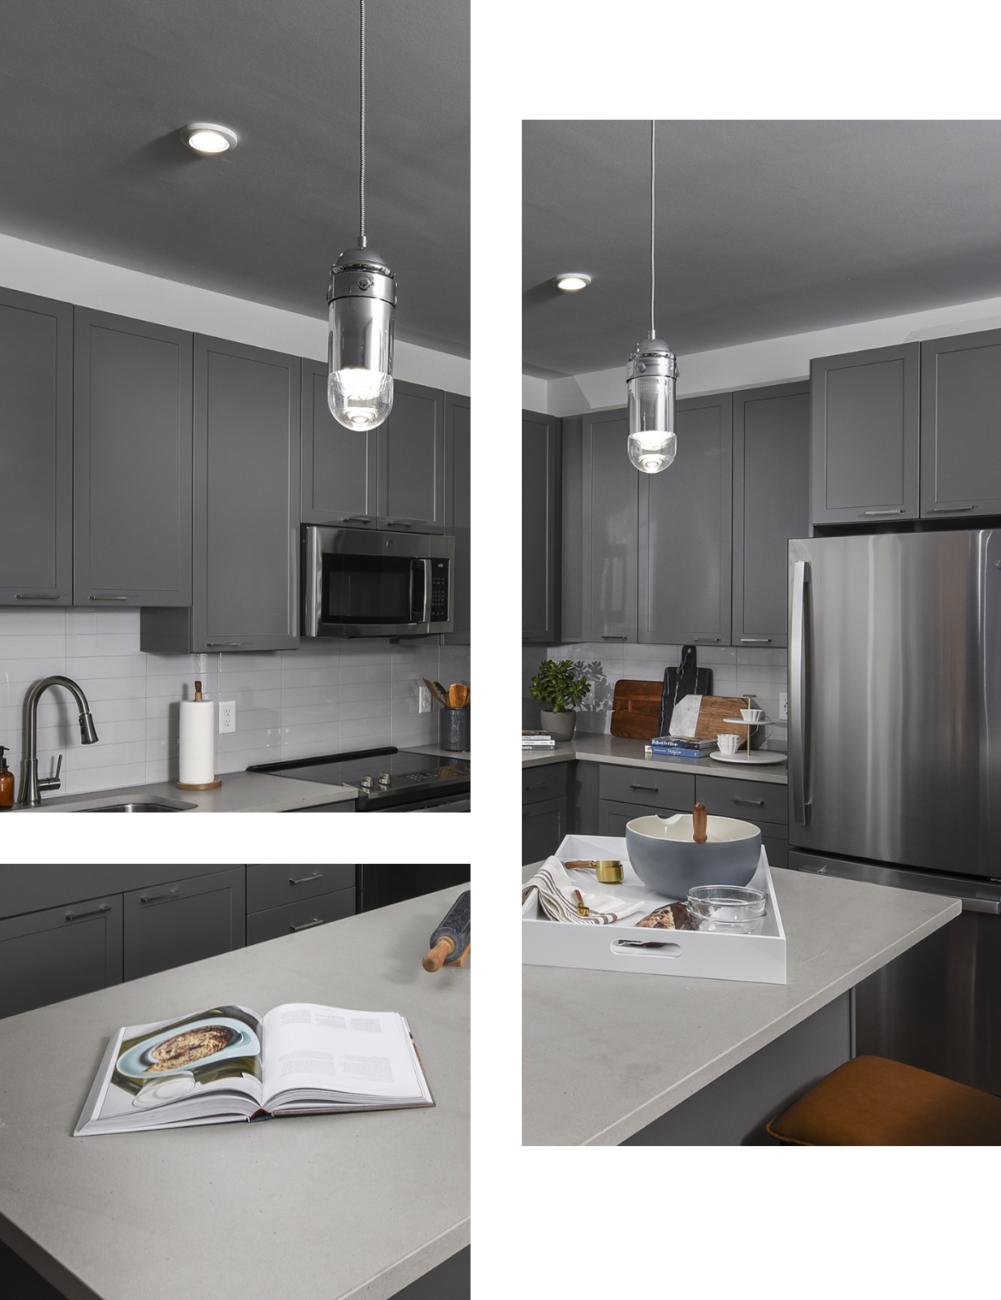 Kitchen with modern lighting at our new apartments in Baltimore, MD.